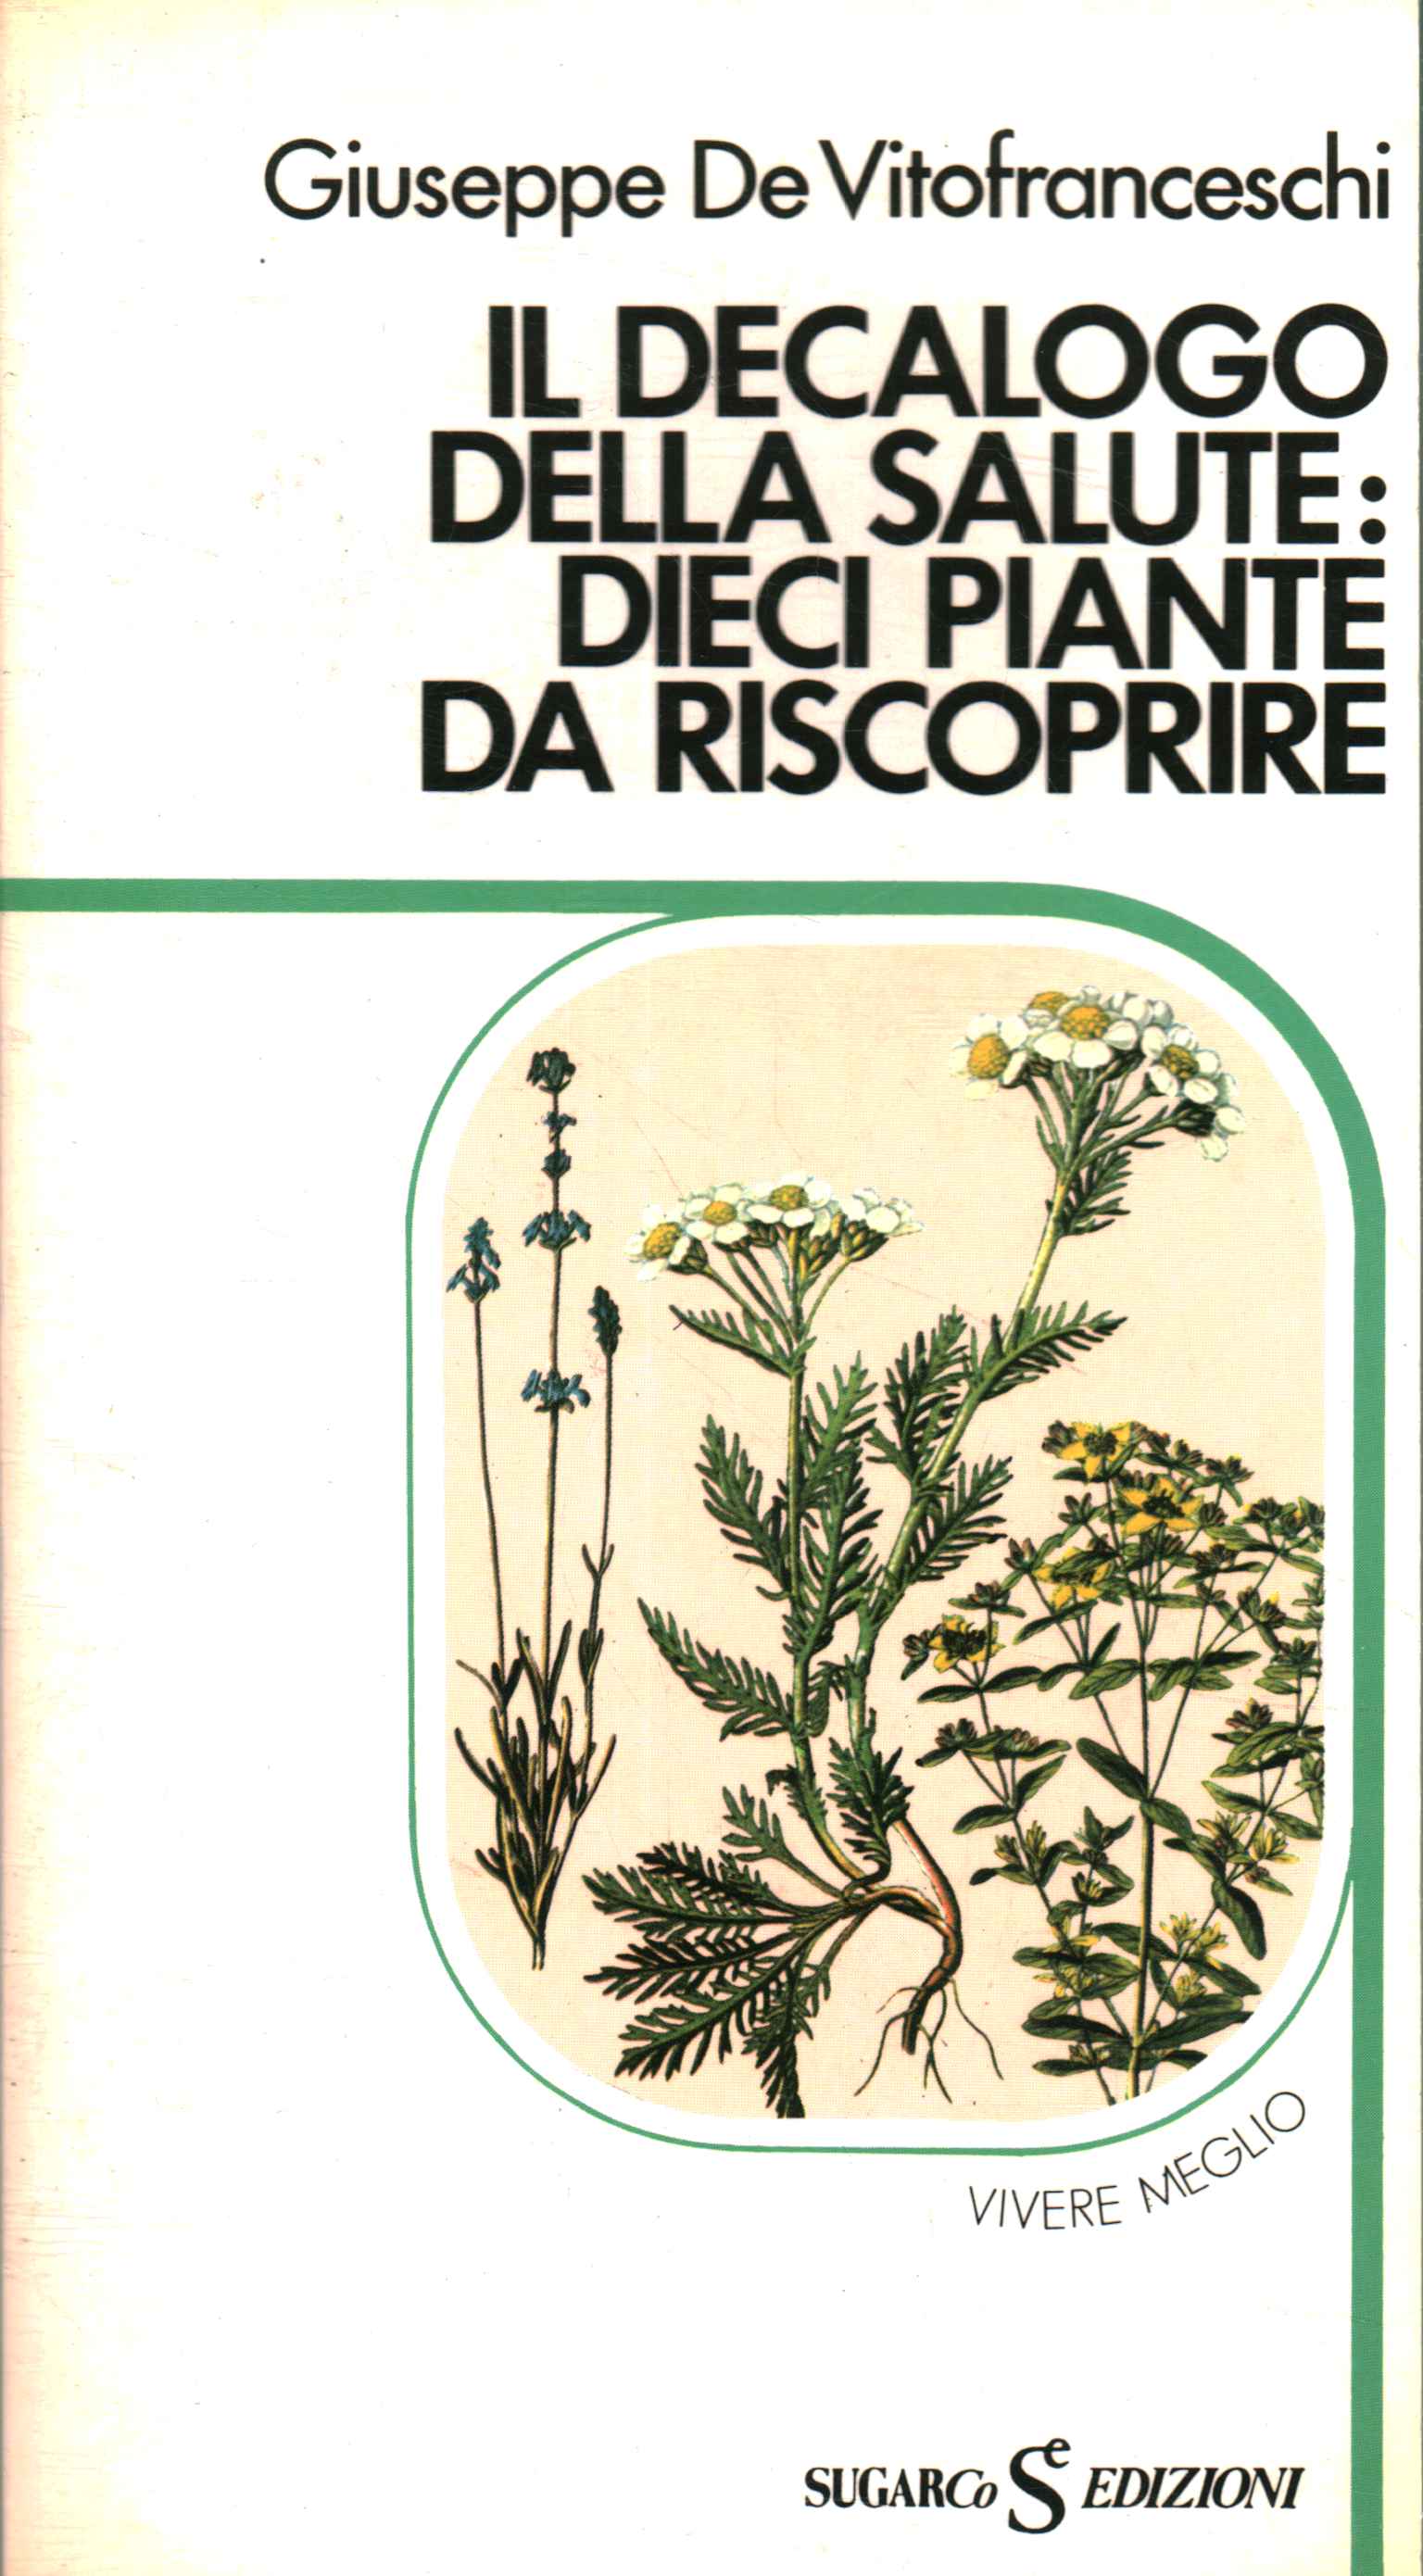 The decalogue of health: ten plants%2,The decalogue of health: ten plants%2,The decalogue of health: ten plants%2